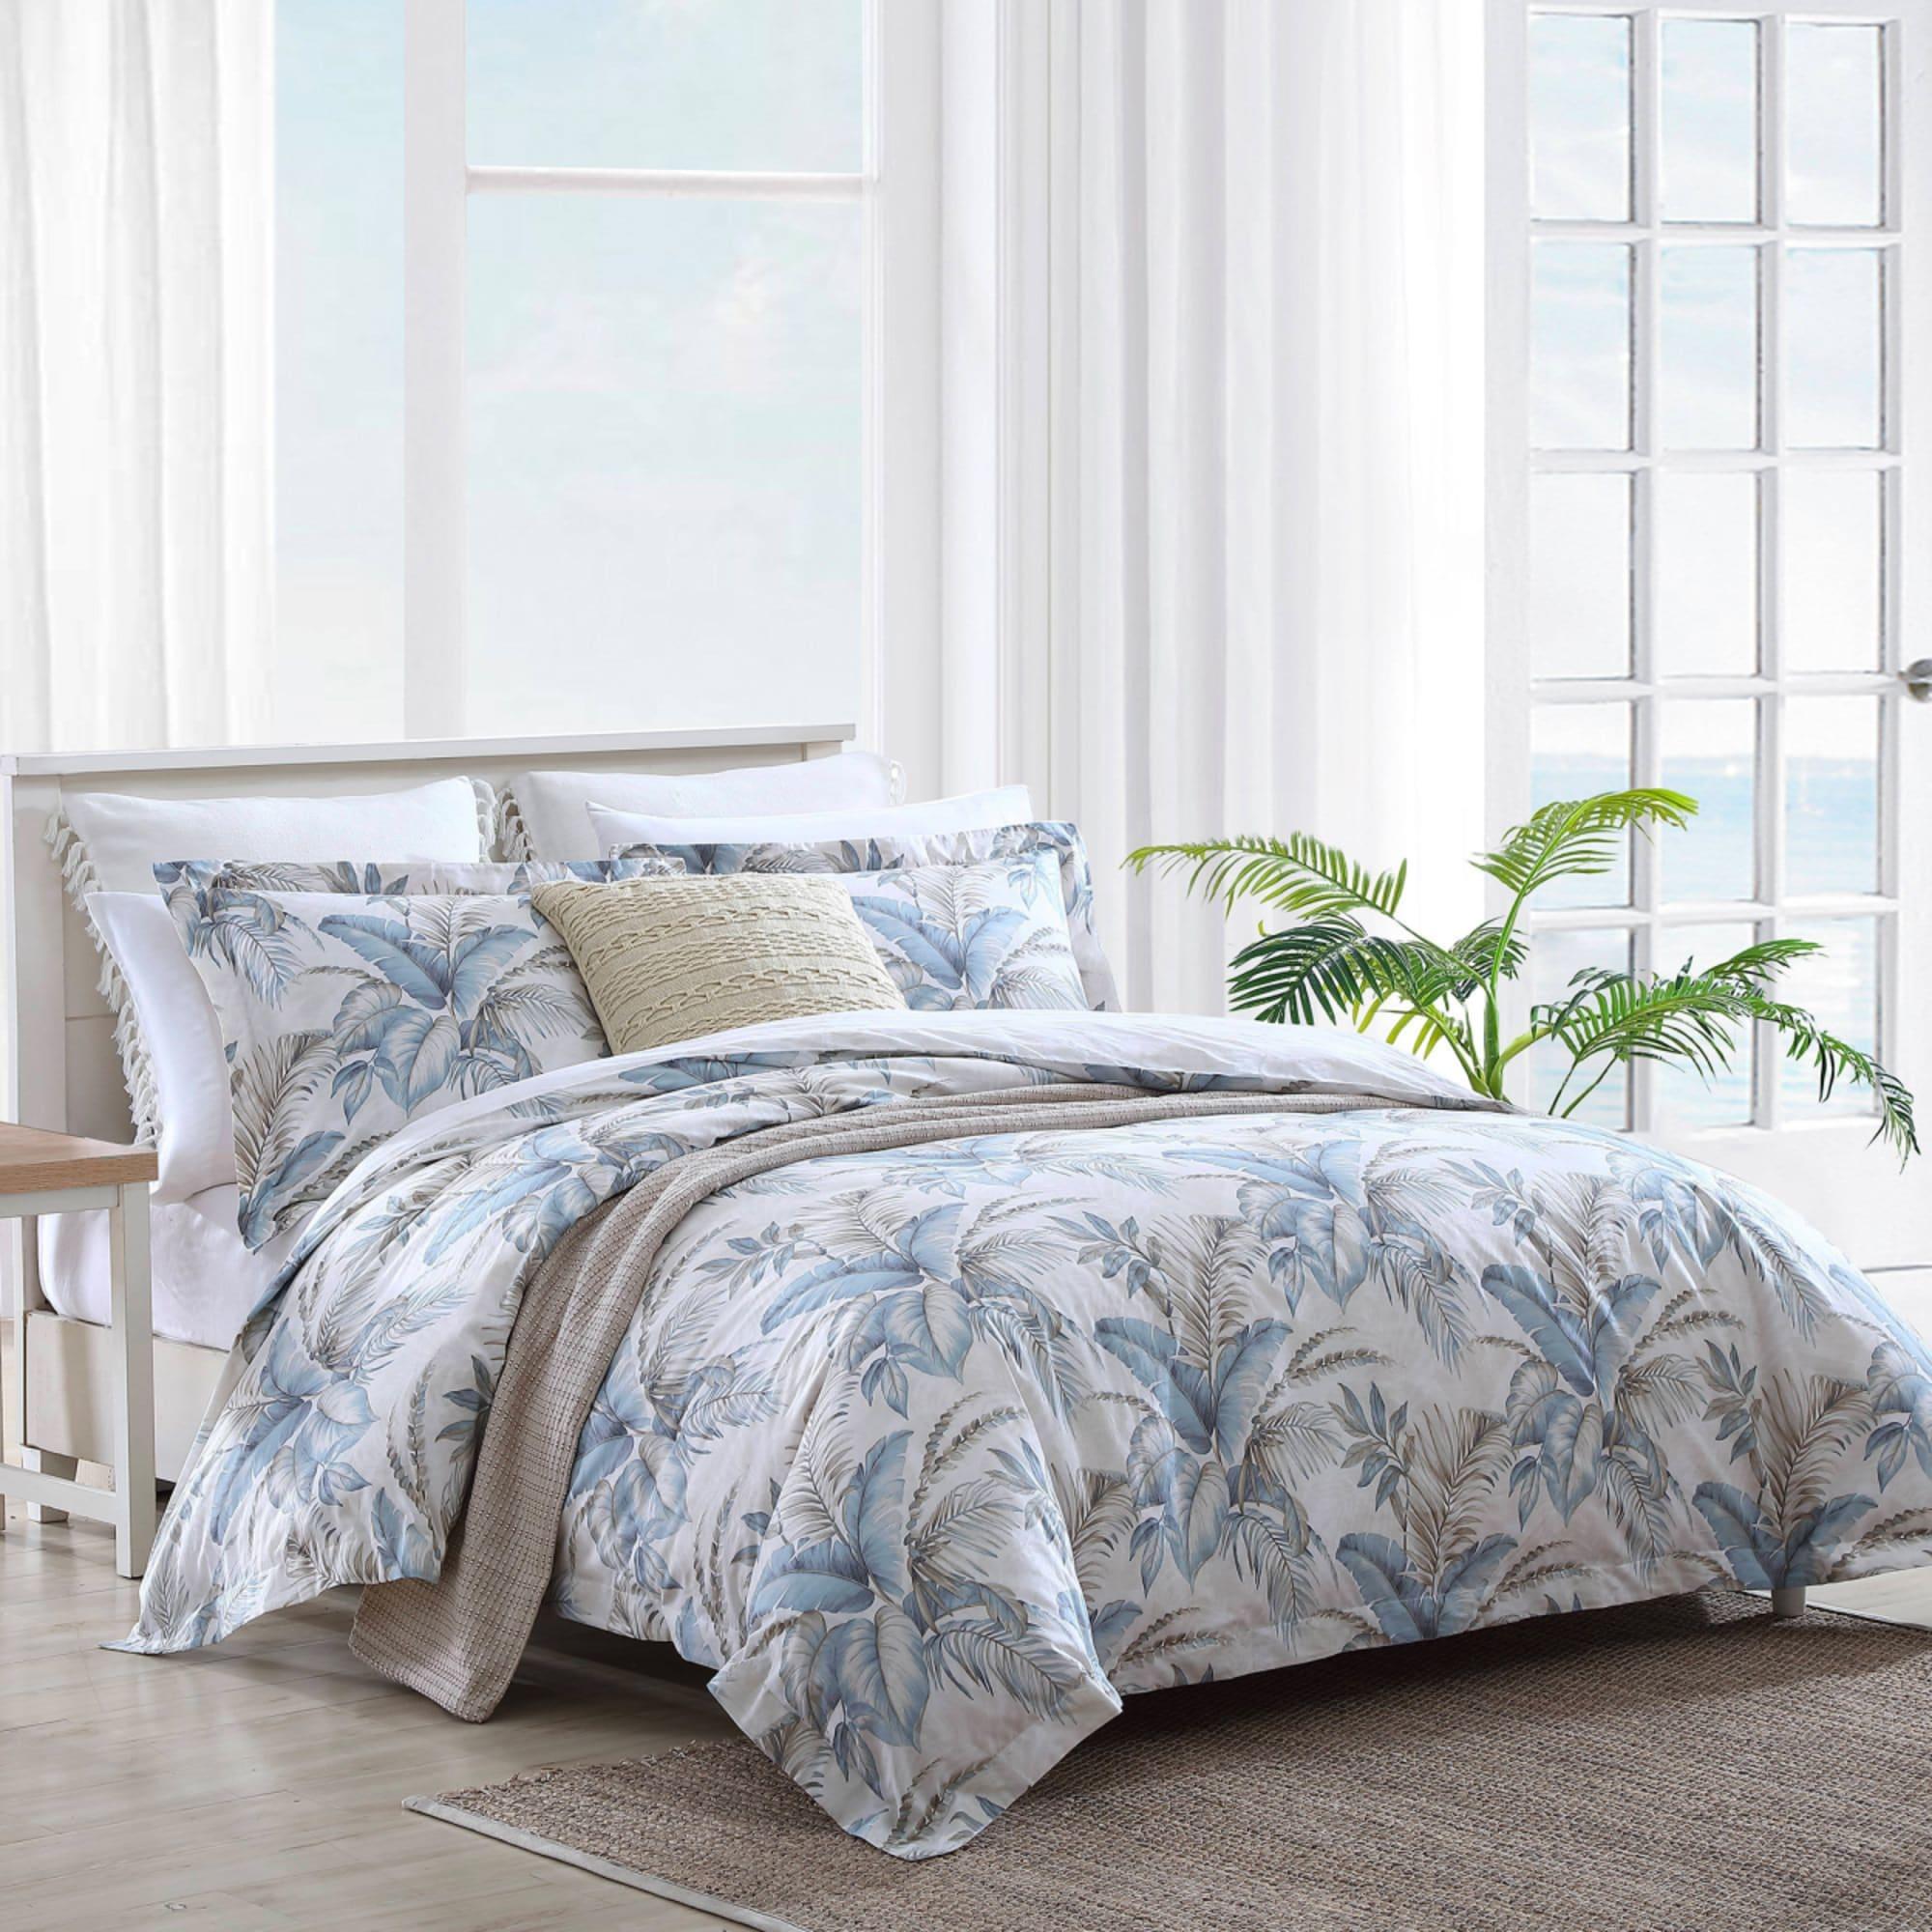 Tommy Bahama Bakers Bluff Quilt Cover Set Queen Image 3